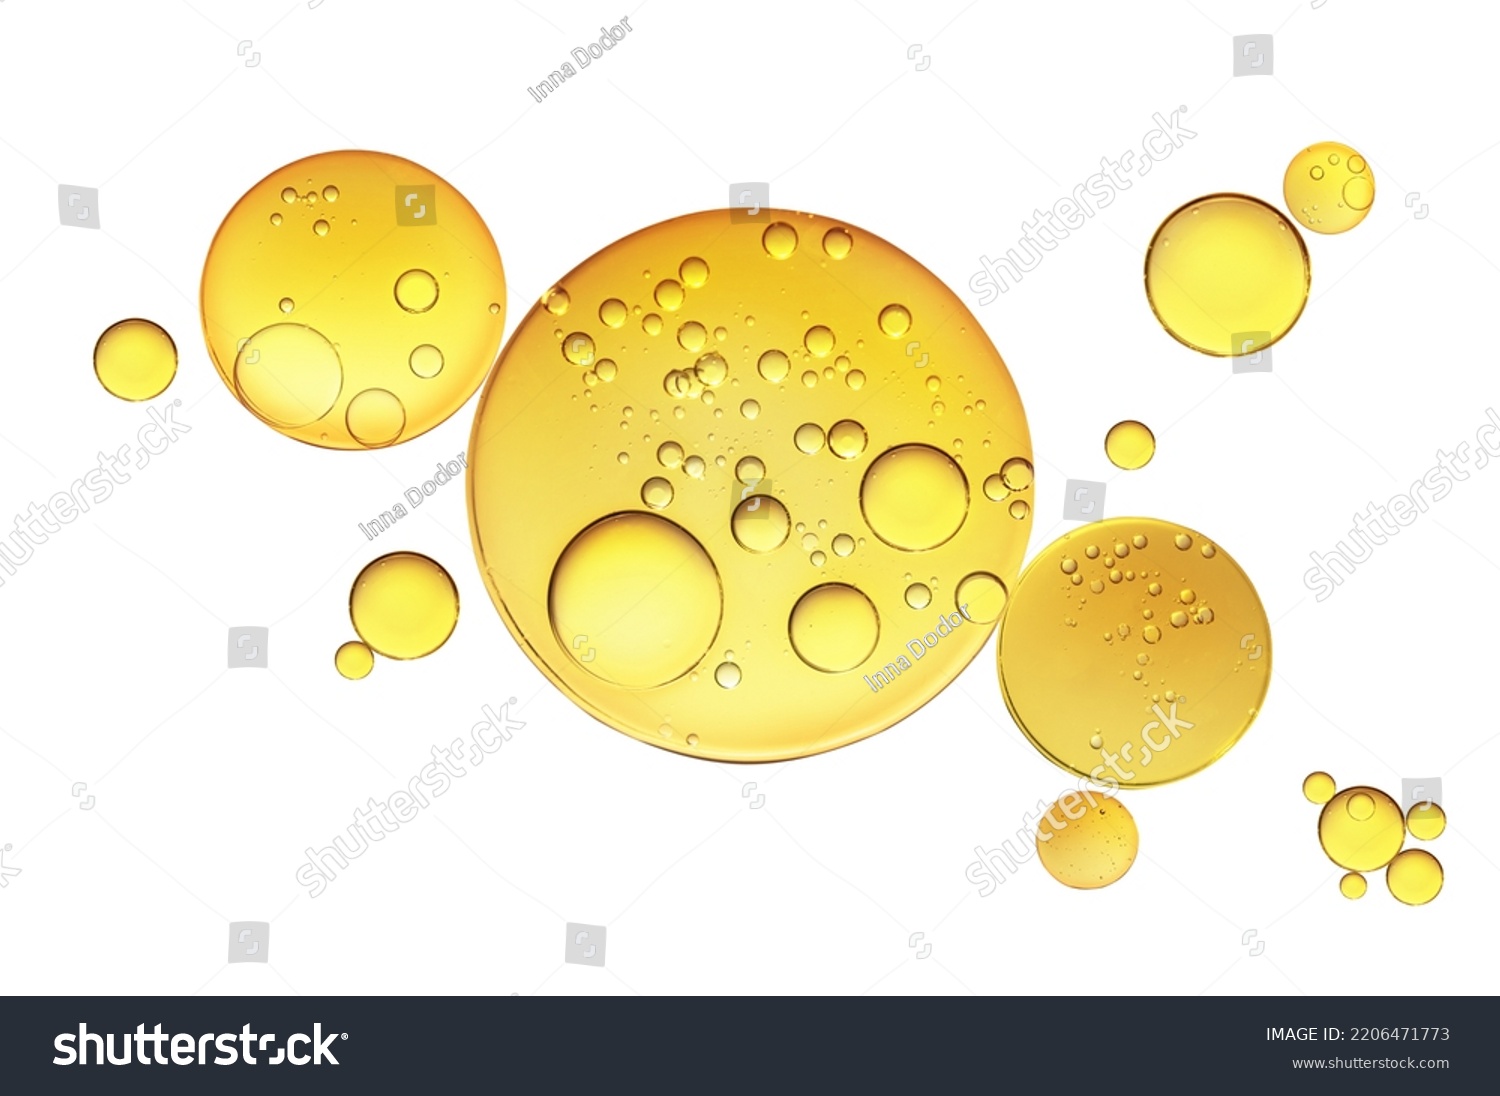 Golden yellow abstract oil bubbles or face serum isolated on white background. Oil bubbles macro photography. #2206471773